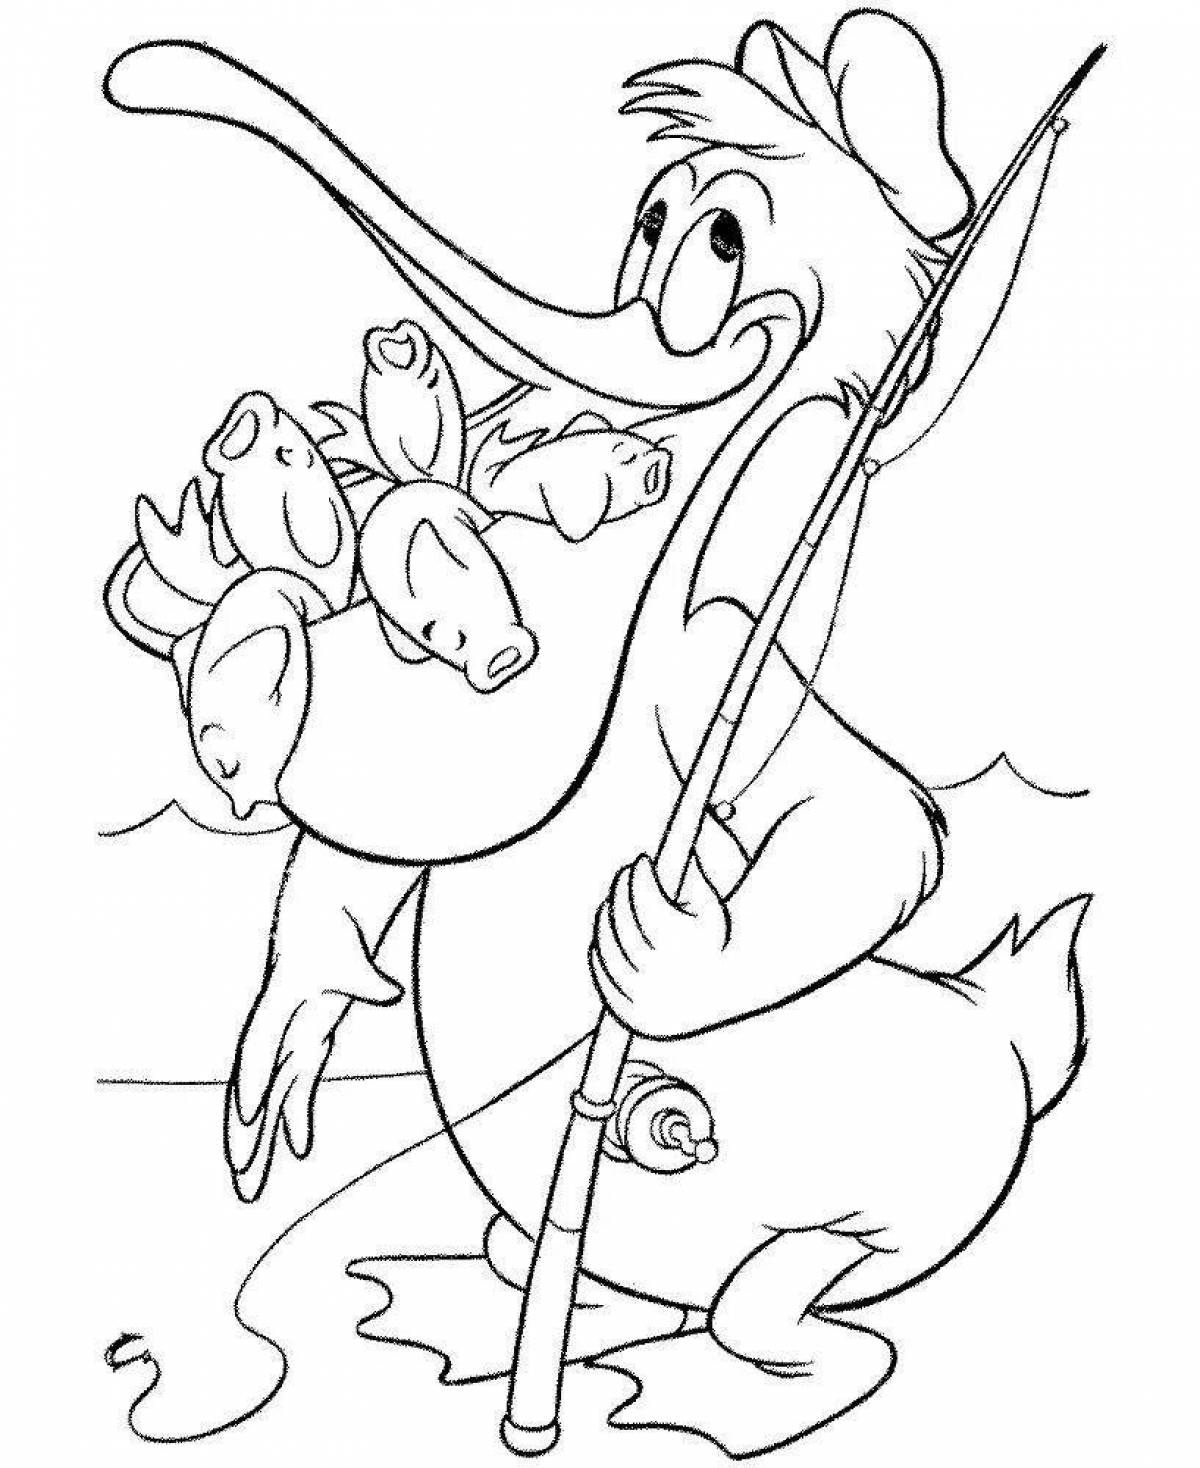 Awesome pelican coloring book for schoolchildren